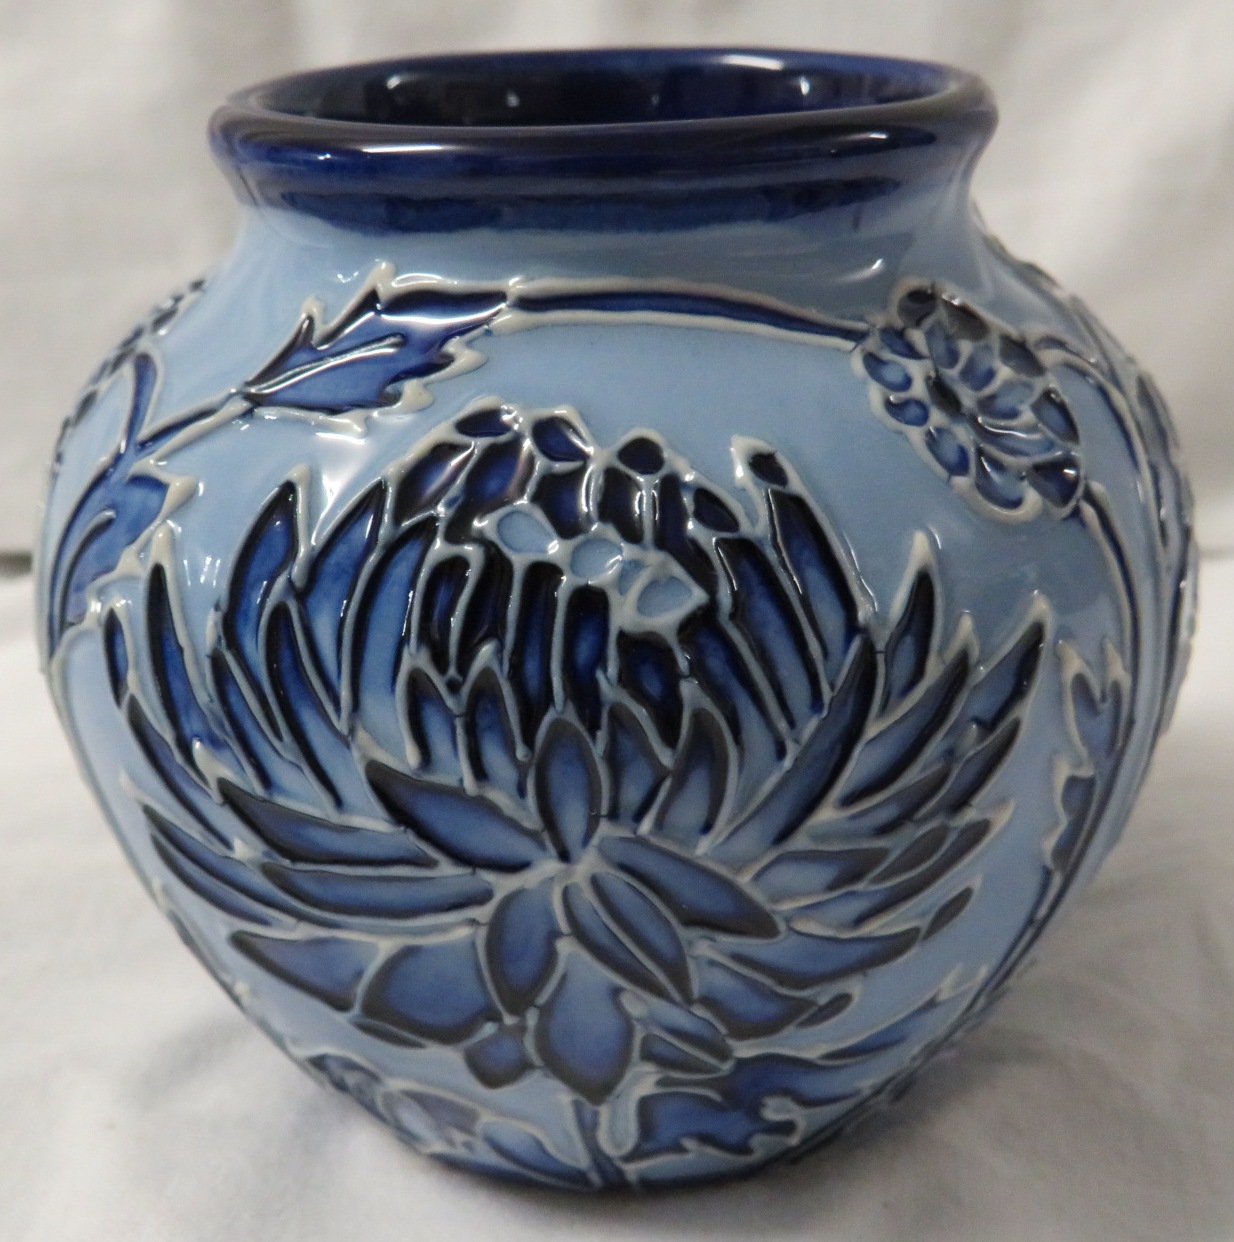 Moorcroft pottery small ovoid vase in the style of Macintyre Florian ware, pale blue with tube lined